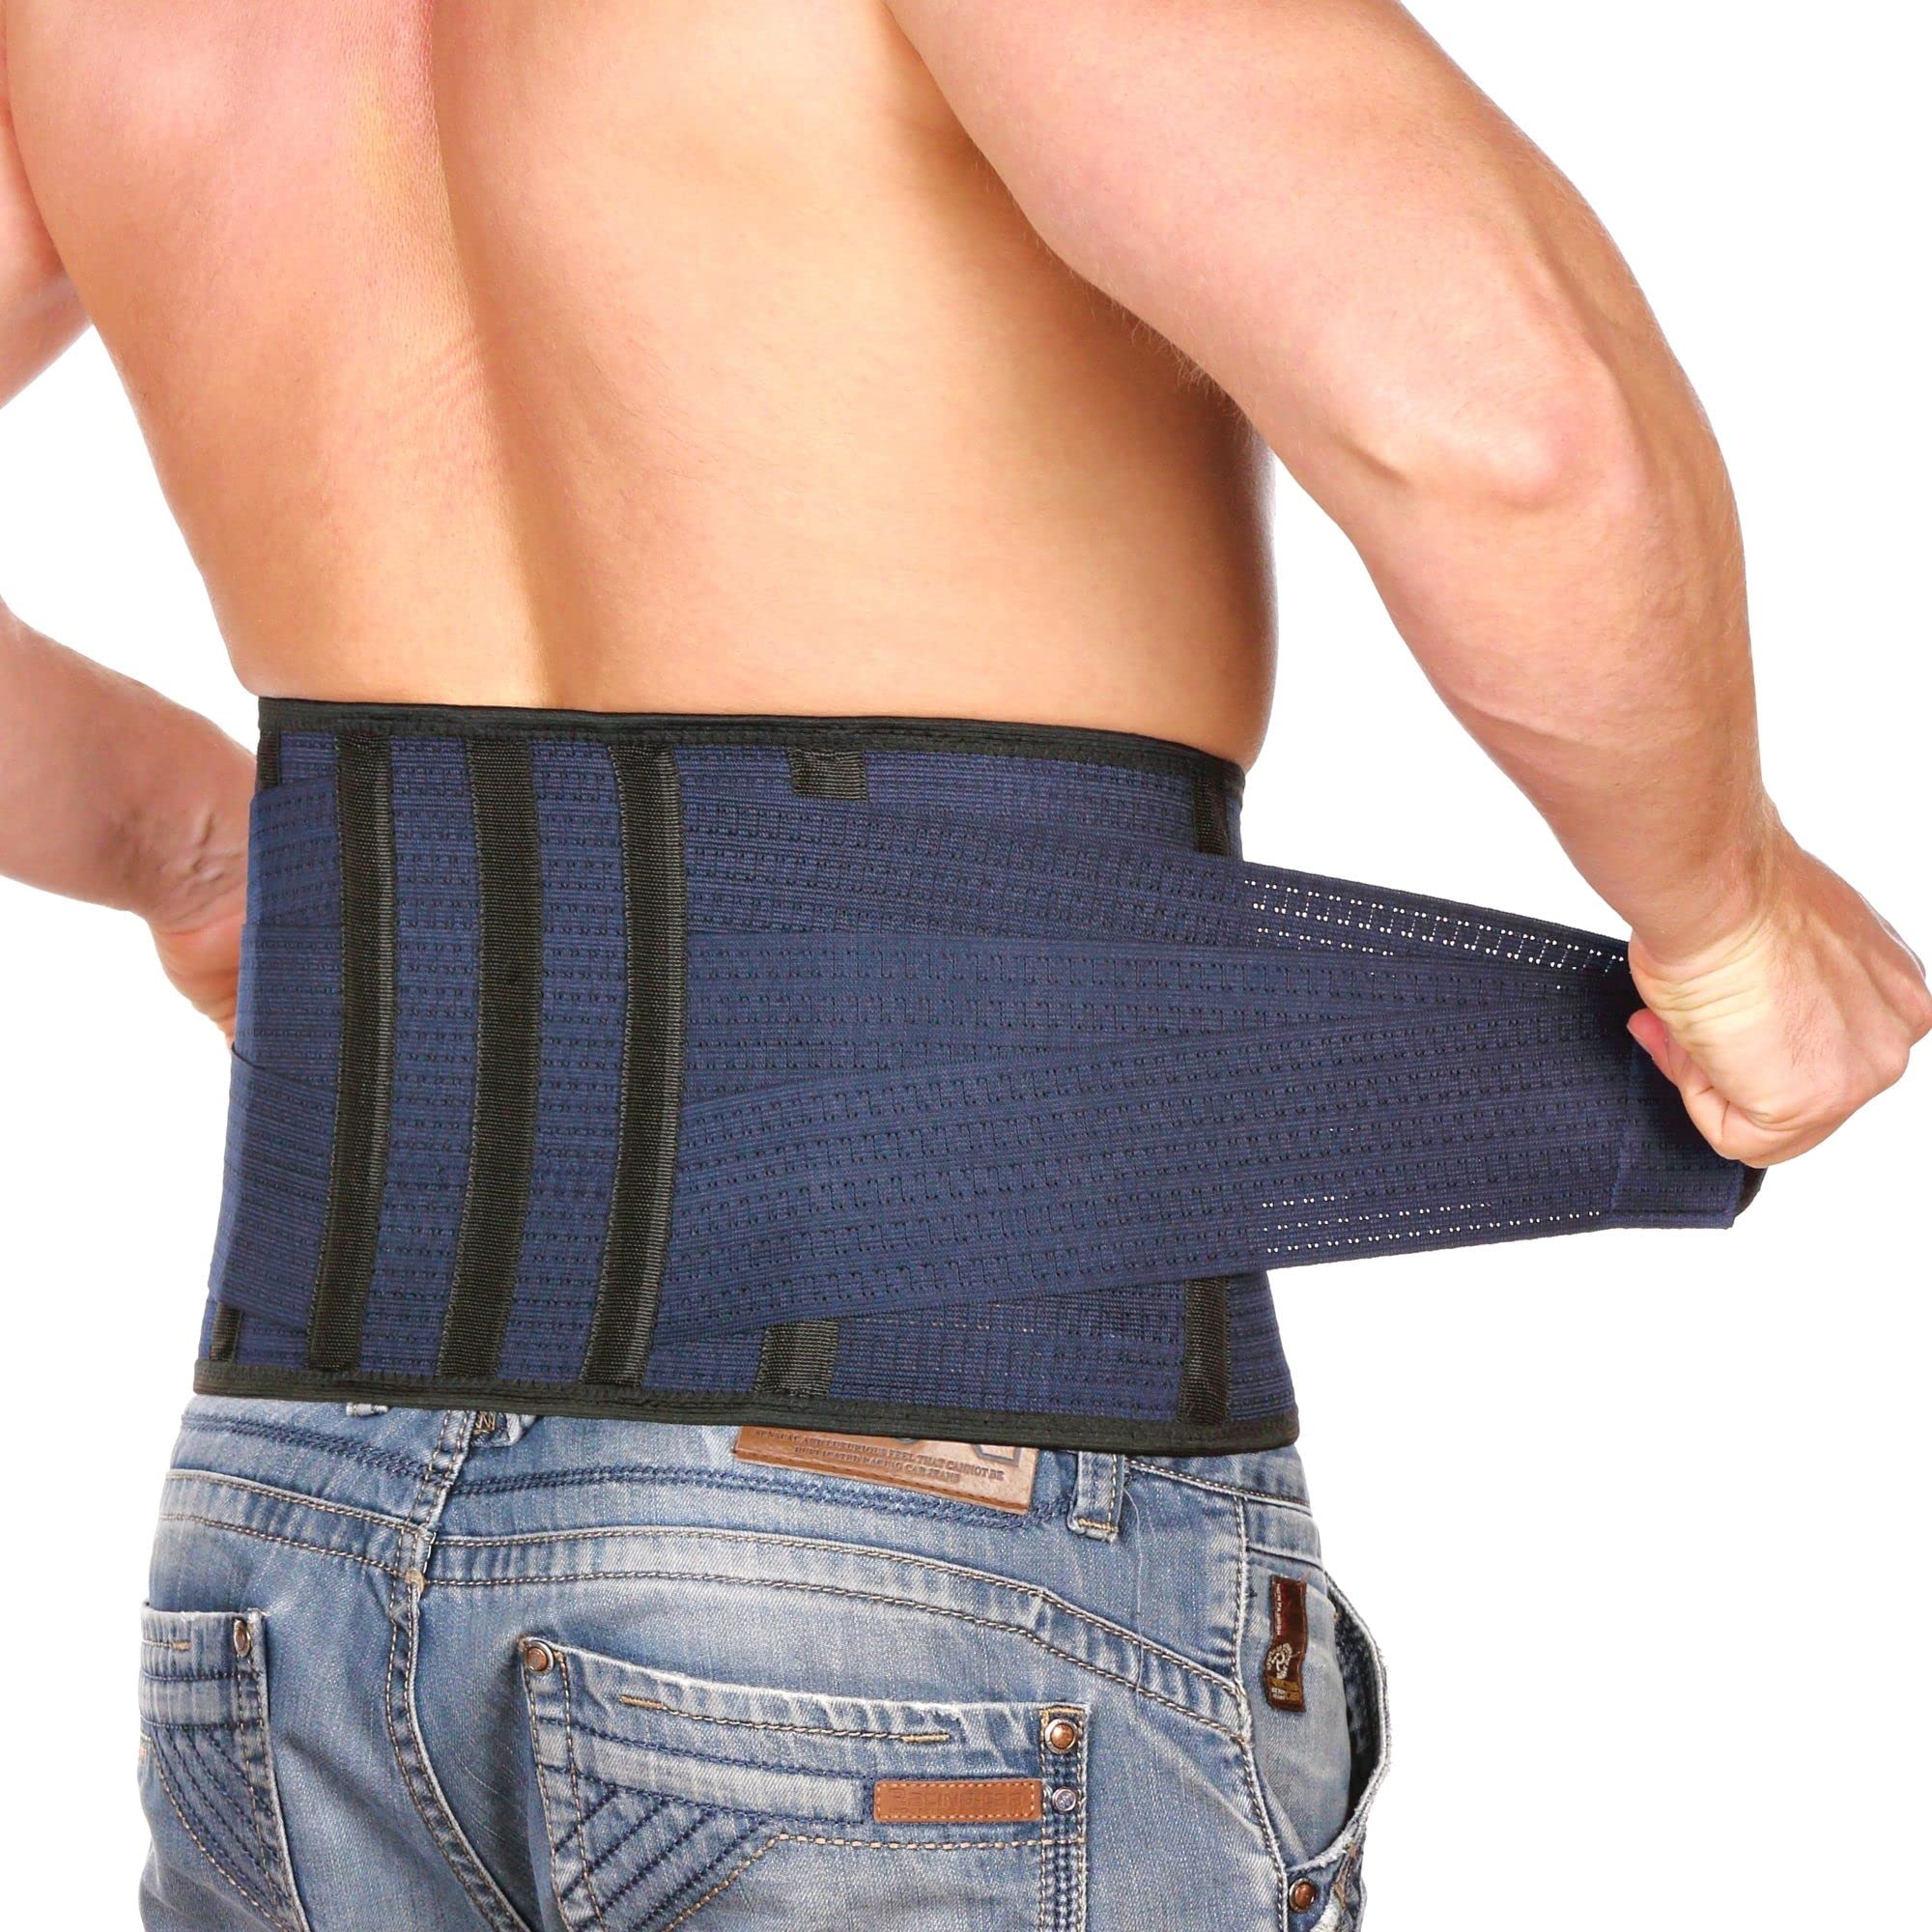 AVESTON Back Support Lower Back Brace for Back Pain Relief